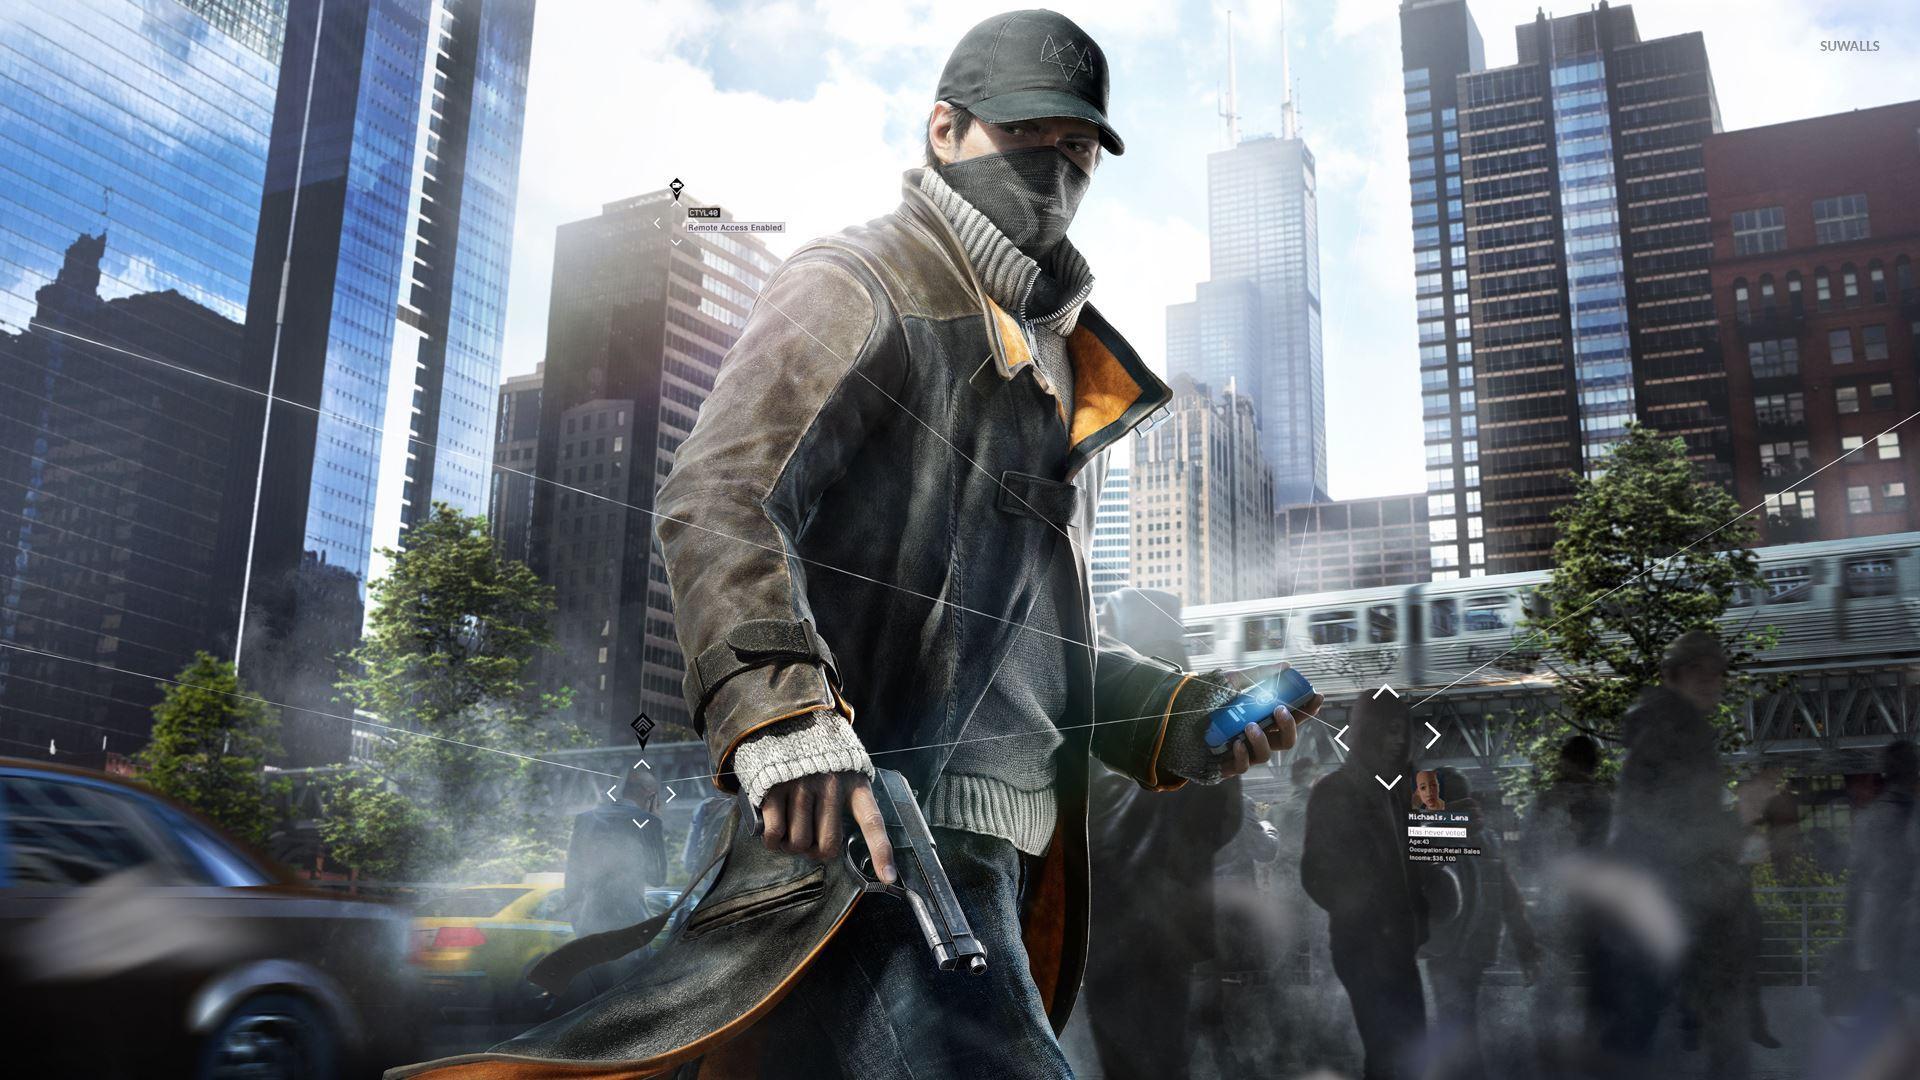 Watch Dogs 2 4k Wallpapers Top Free Watch Dogs 2 4k Backgrounds Wallpaperaccess